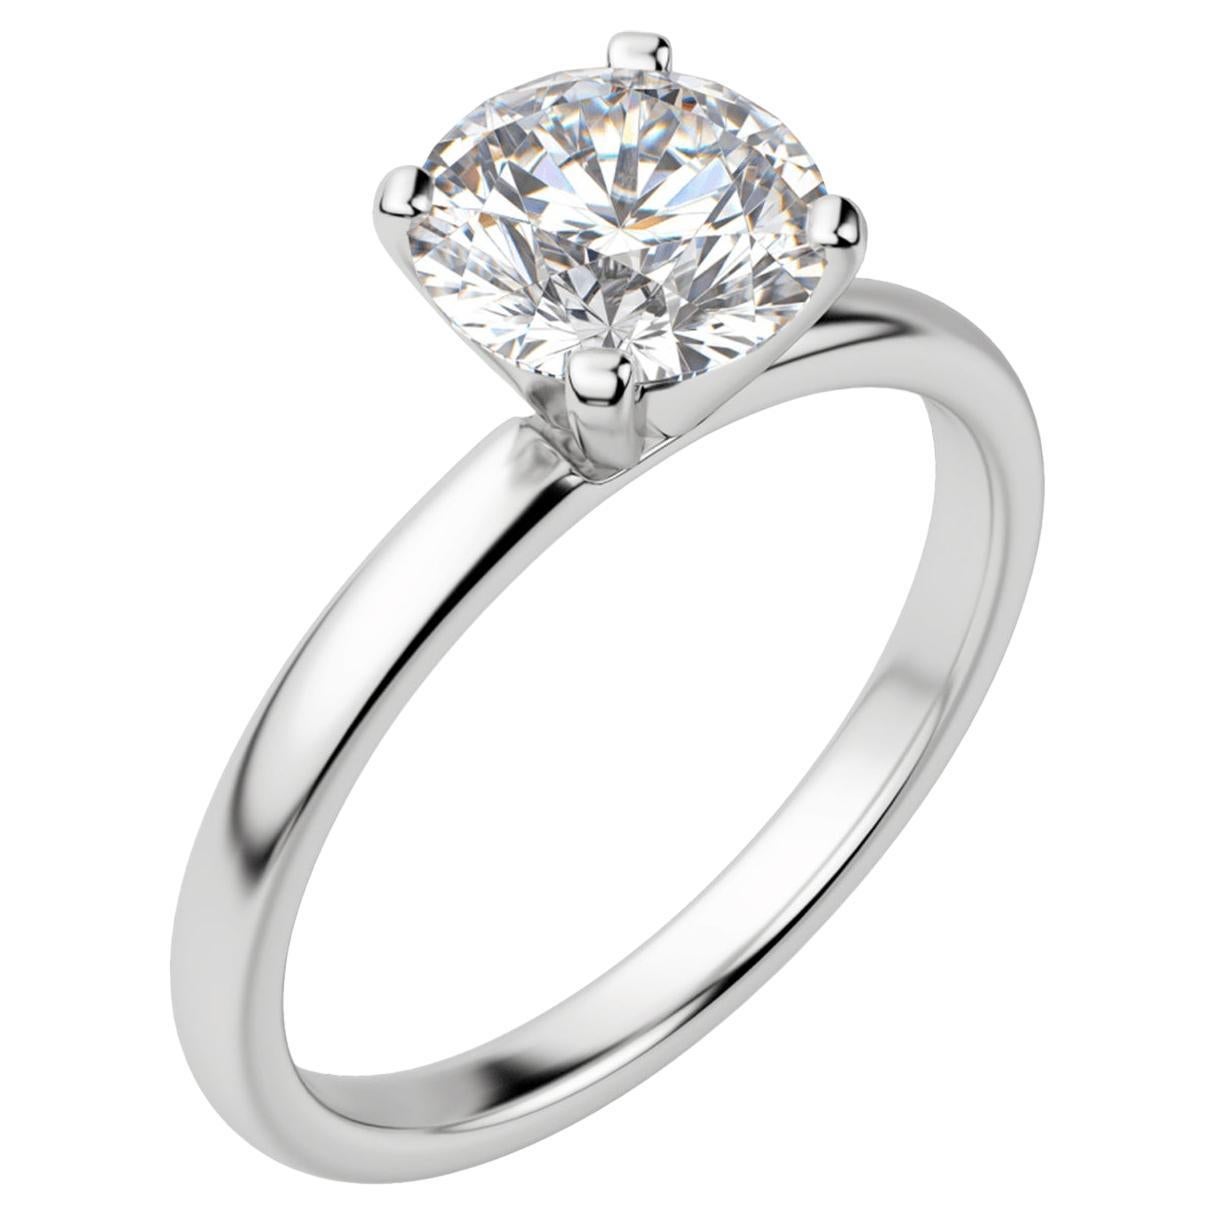 3.01 Carat GIA Round Brilliant Cut Tiffany style Ring 18K White Gold Si1 Clarity For Sale